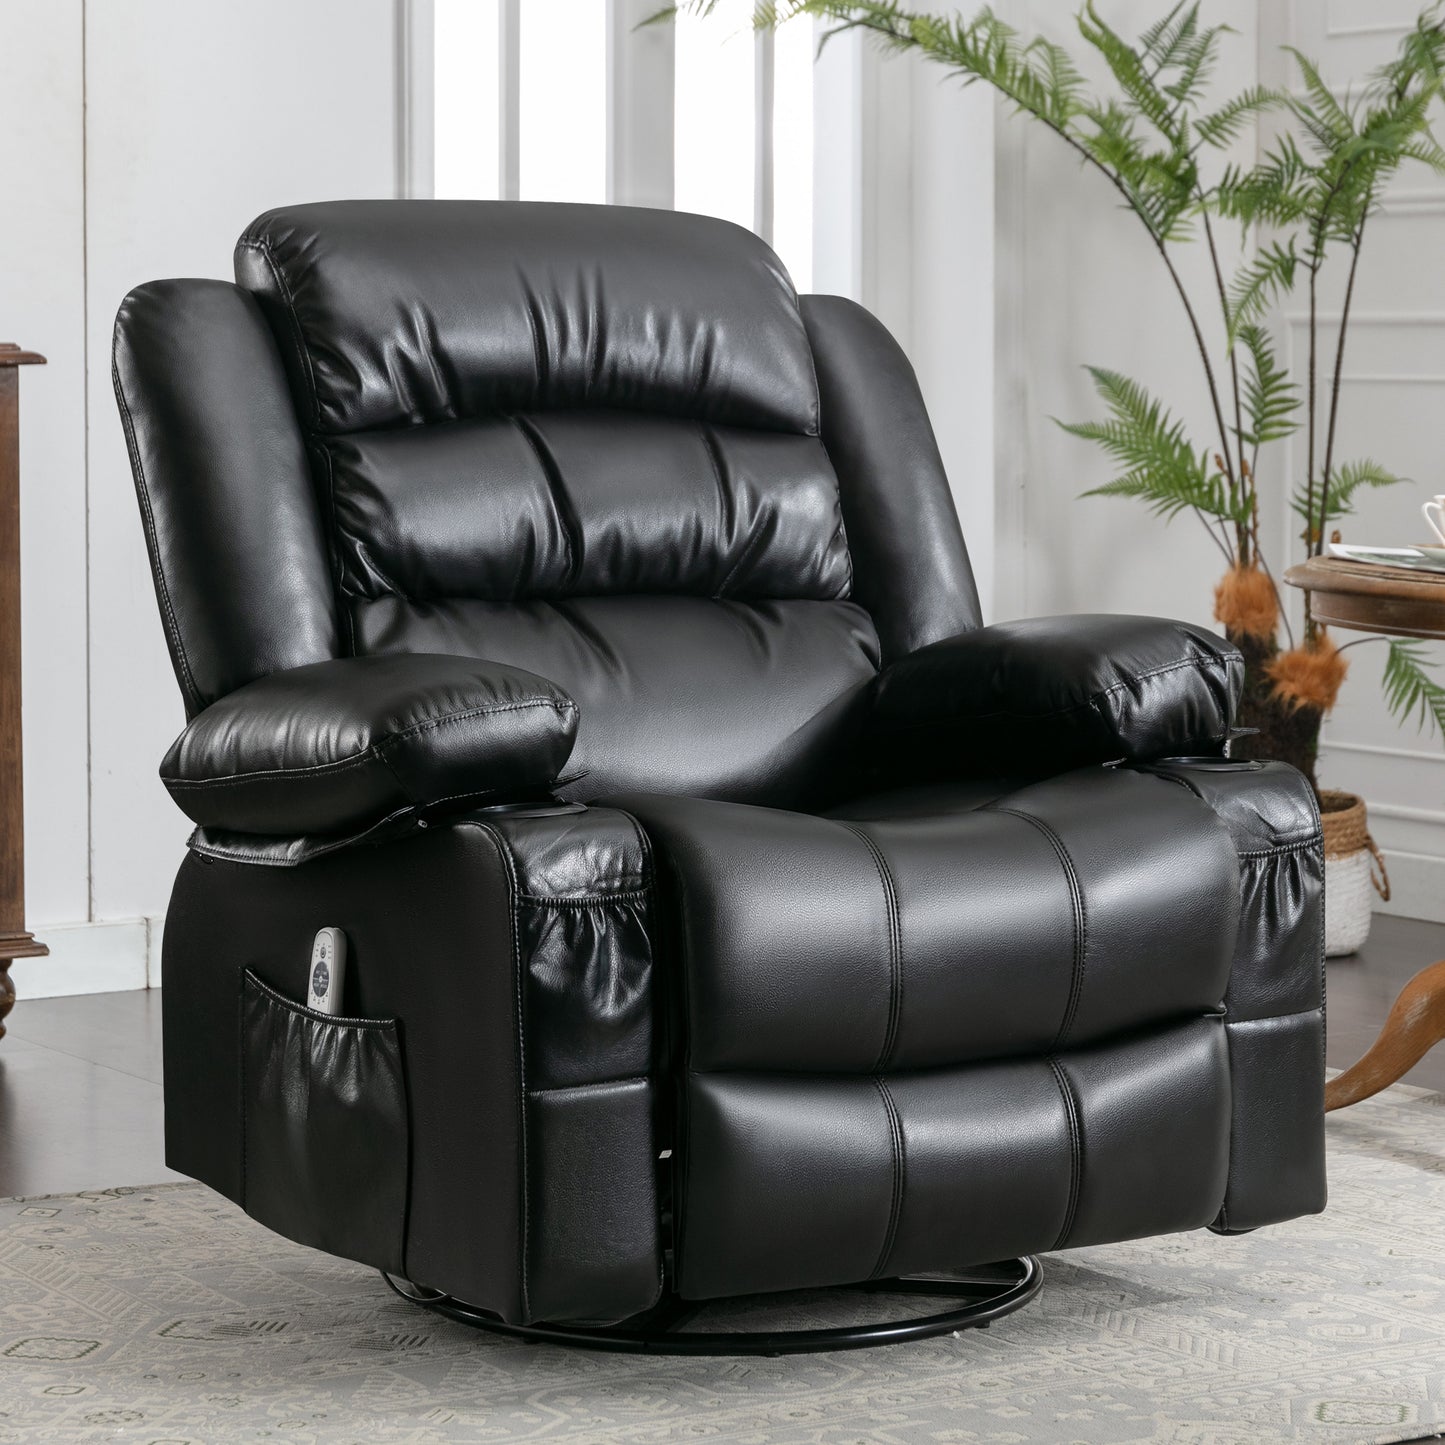 SYNGAR Swivel Rocker Recliner Chair for Living Room, Manual Reclining Chair with Heat and Massage Function, Cup Holders, USB, PU Leather Rocking Sofa Glider Chair for Bedroom Home Theater, Black